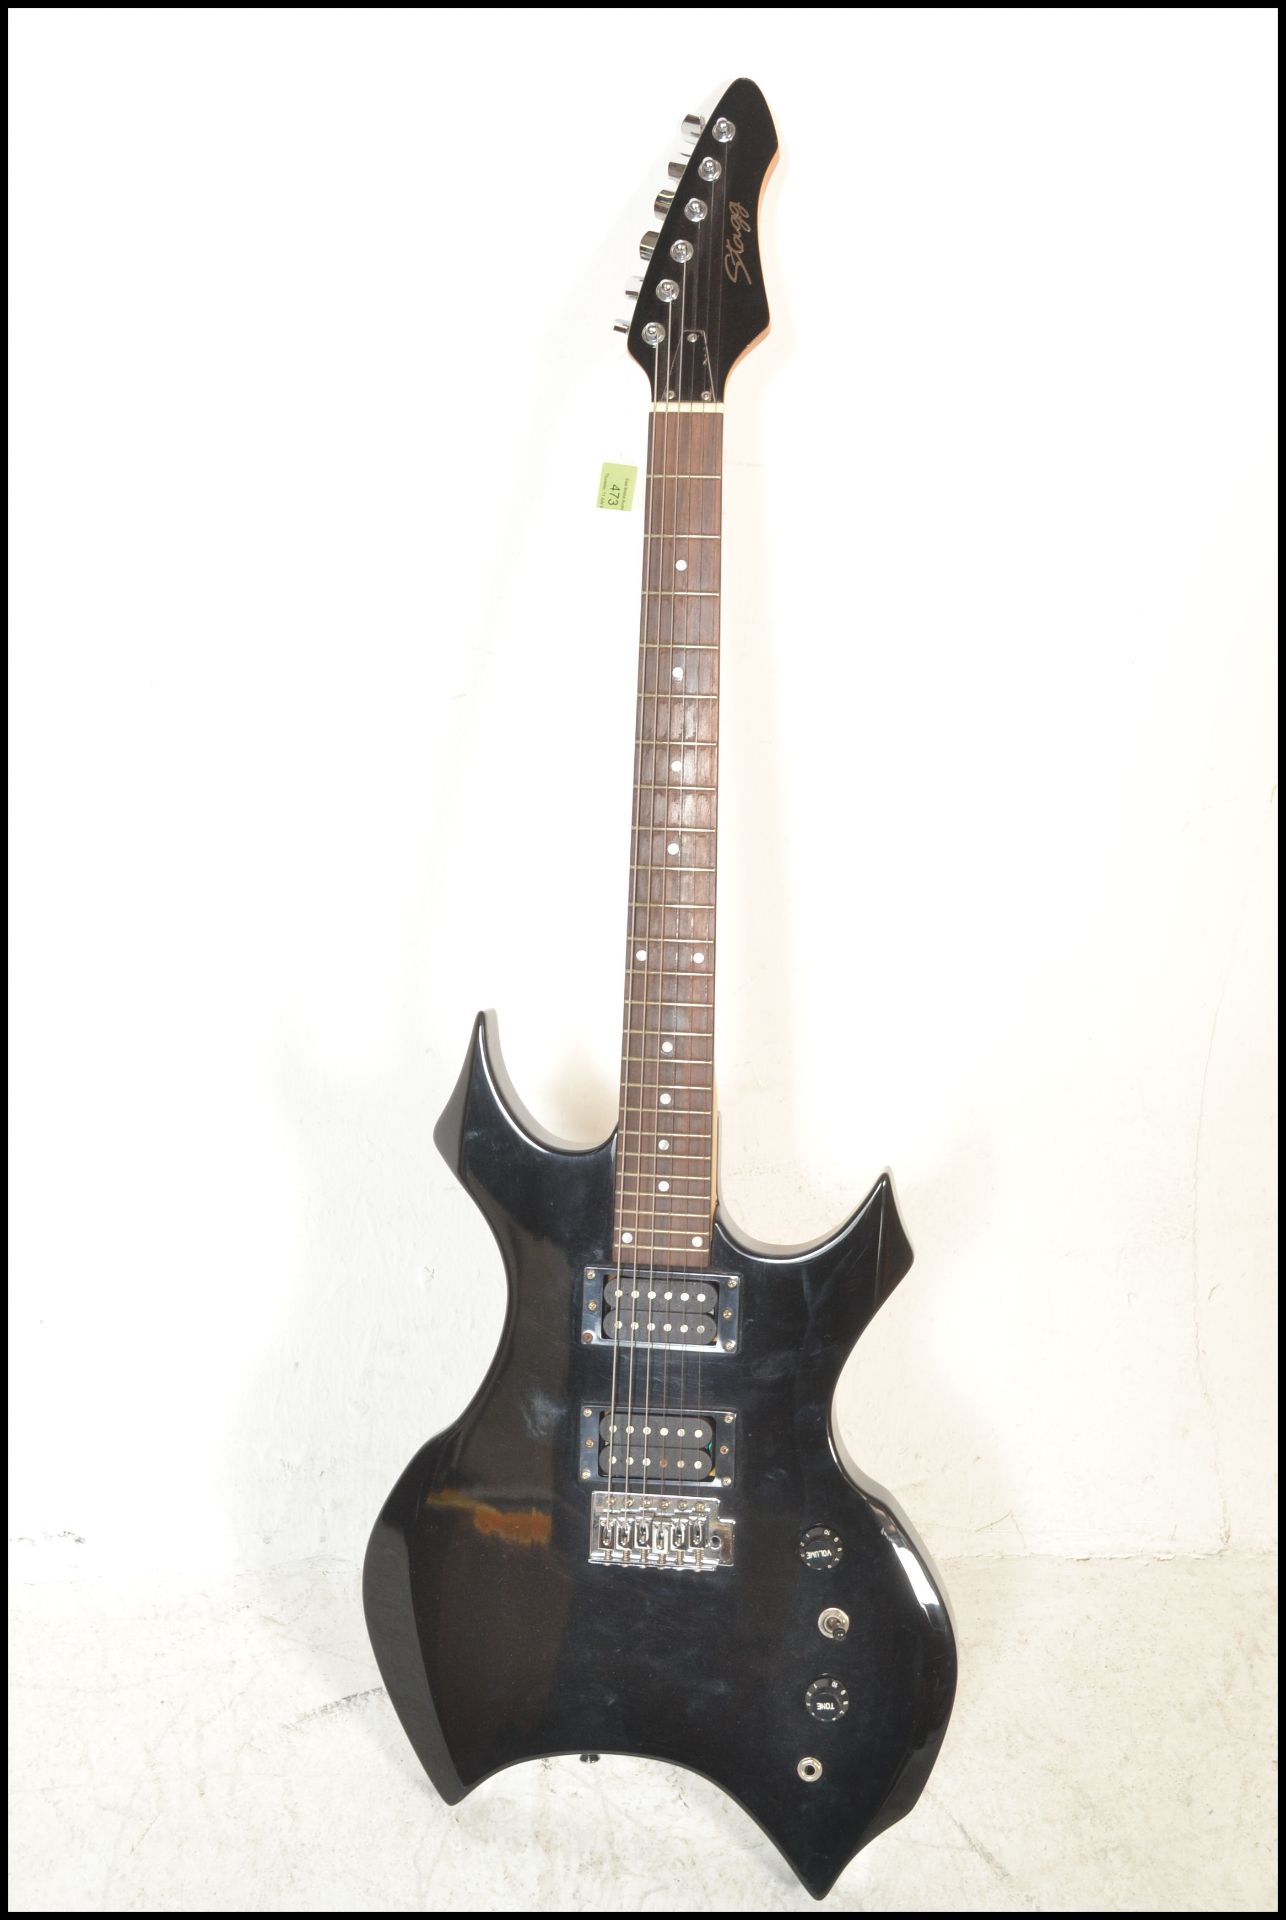 A heavy metal style six string electric guitar made by Stagg, finished in black having having chrome